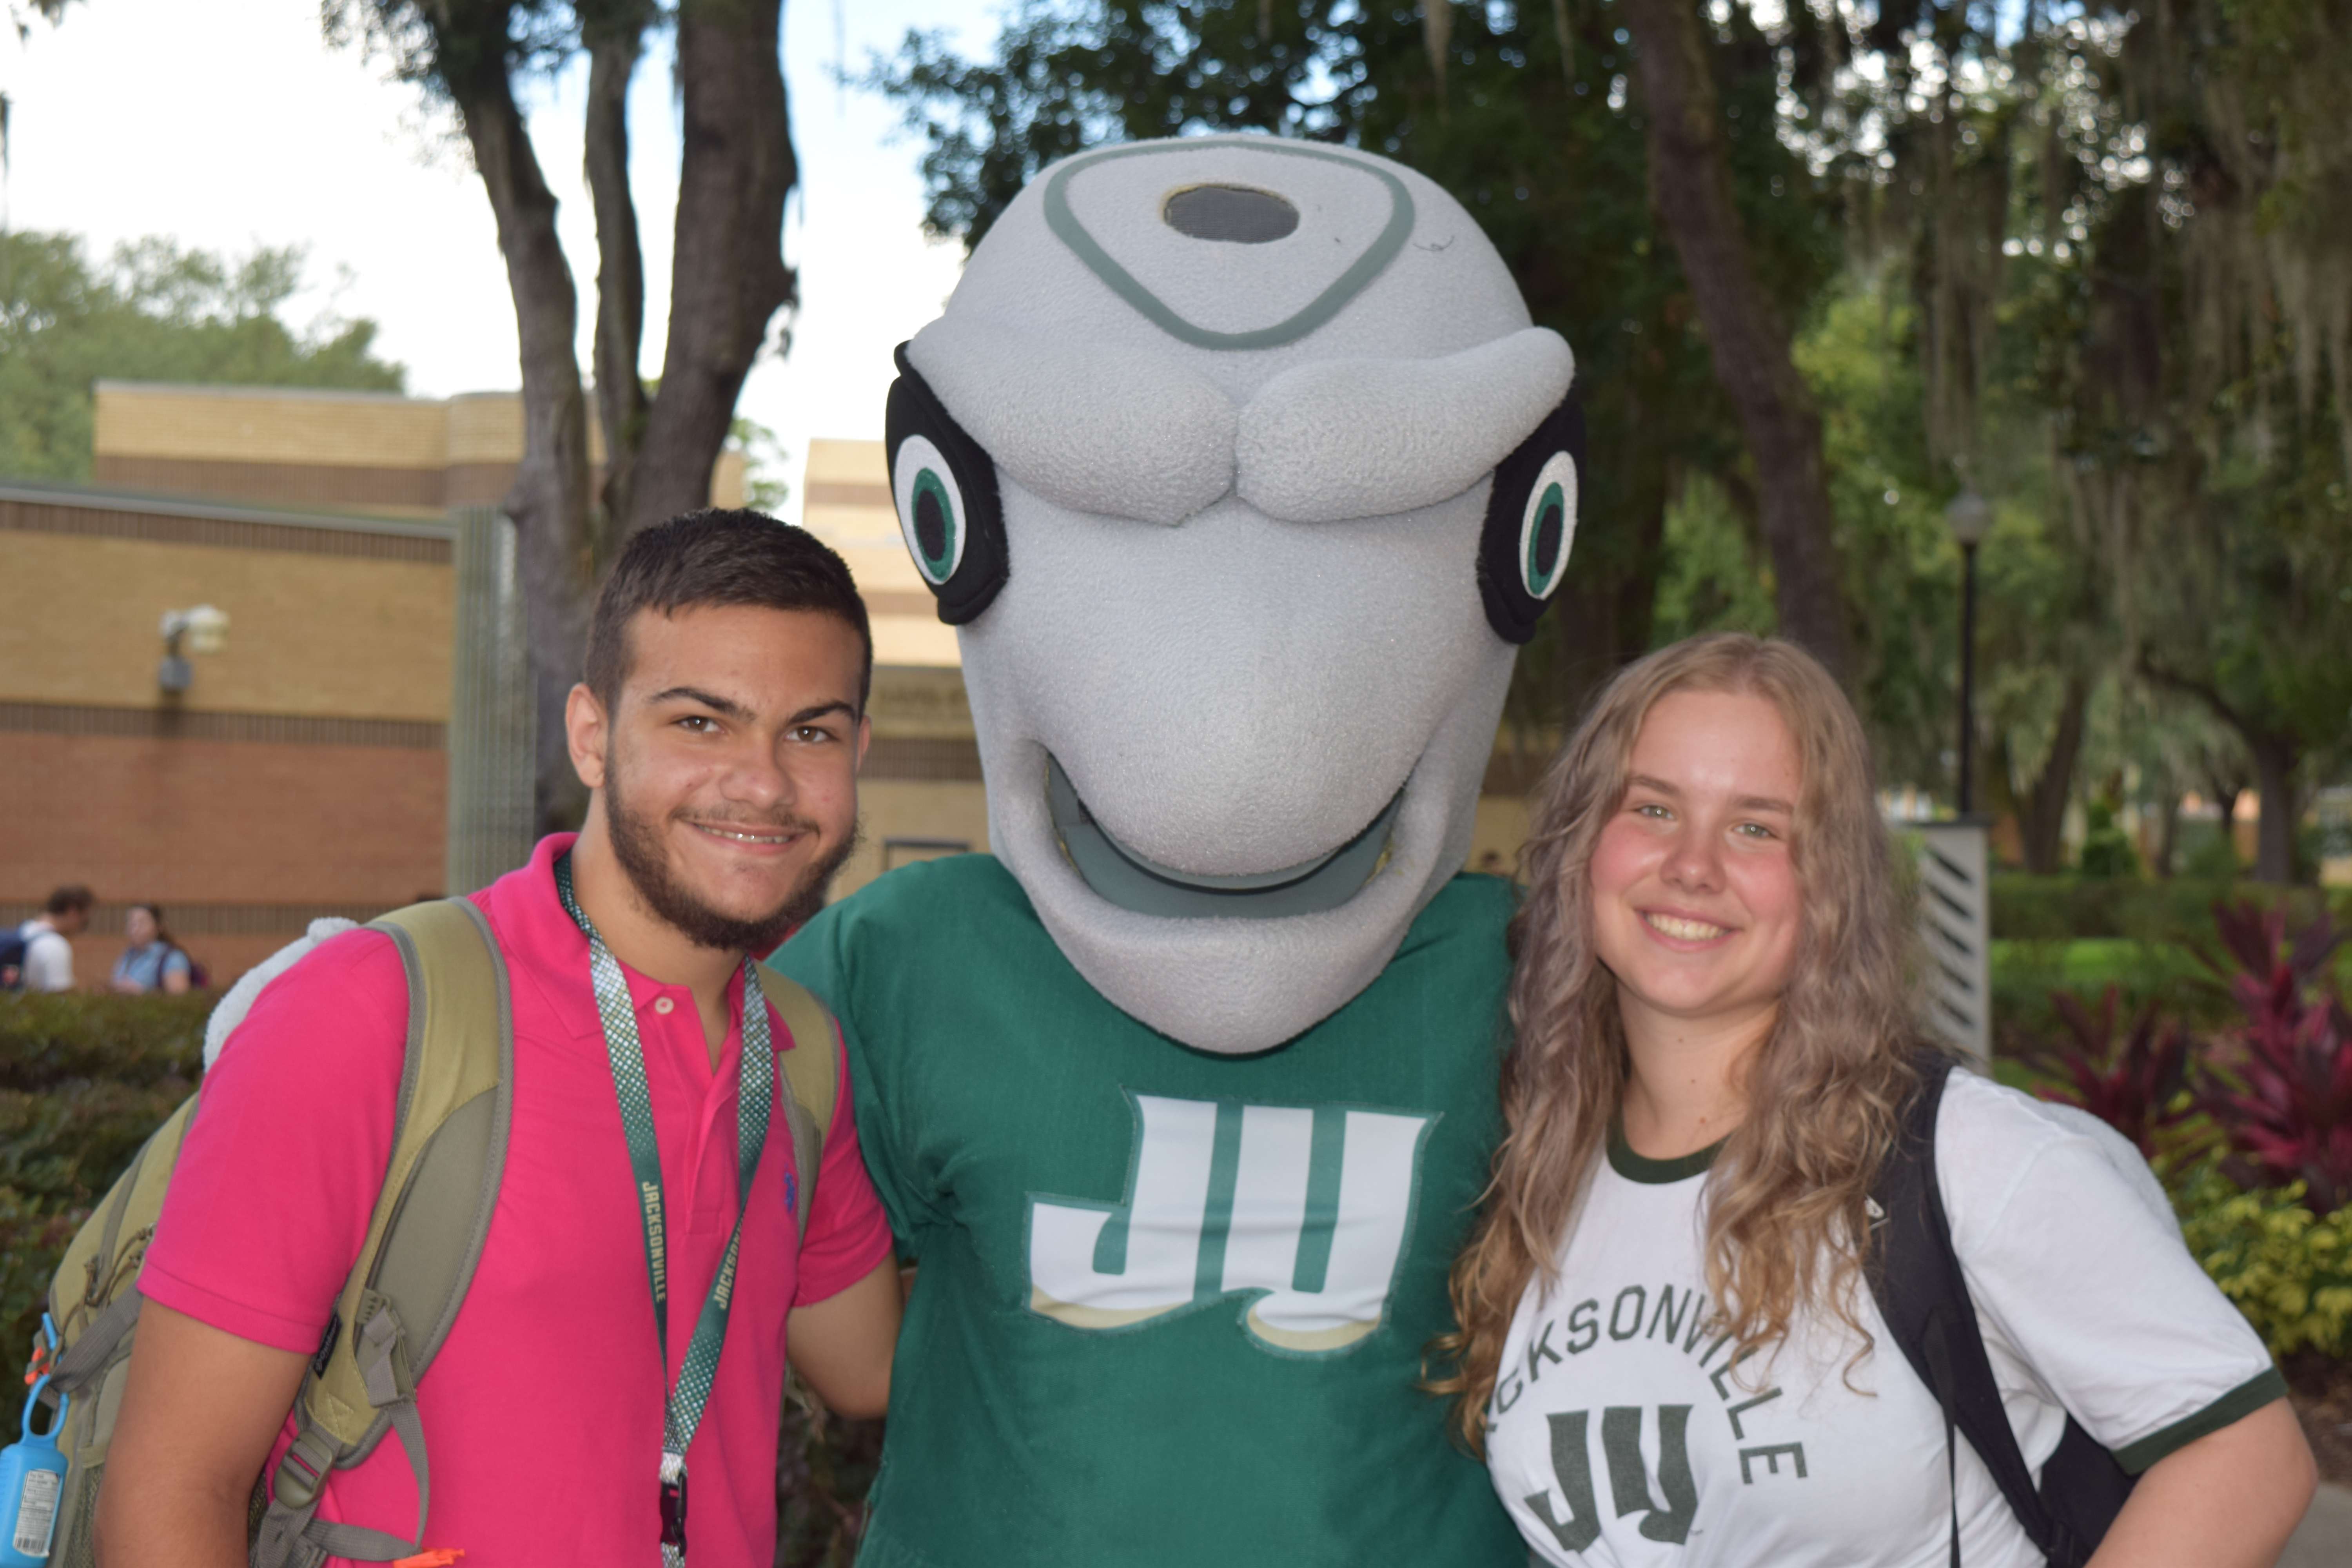 Students smiling with mascot, Dunkin